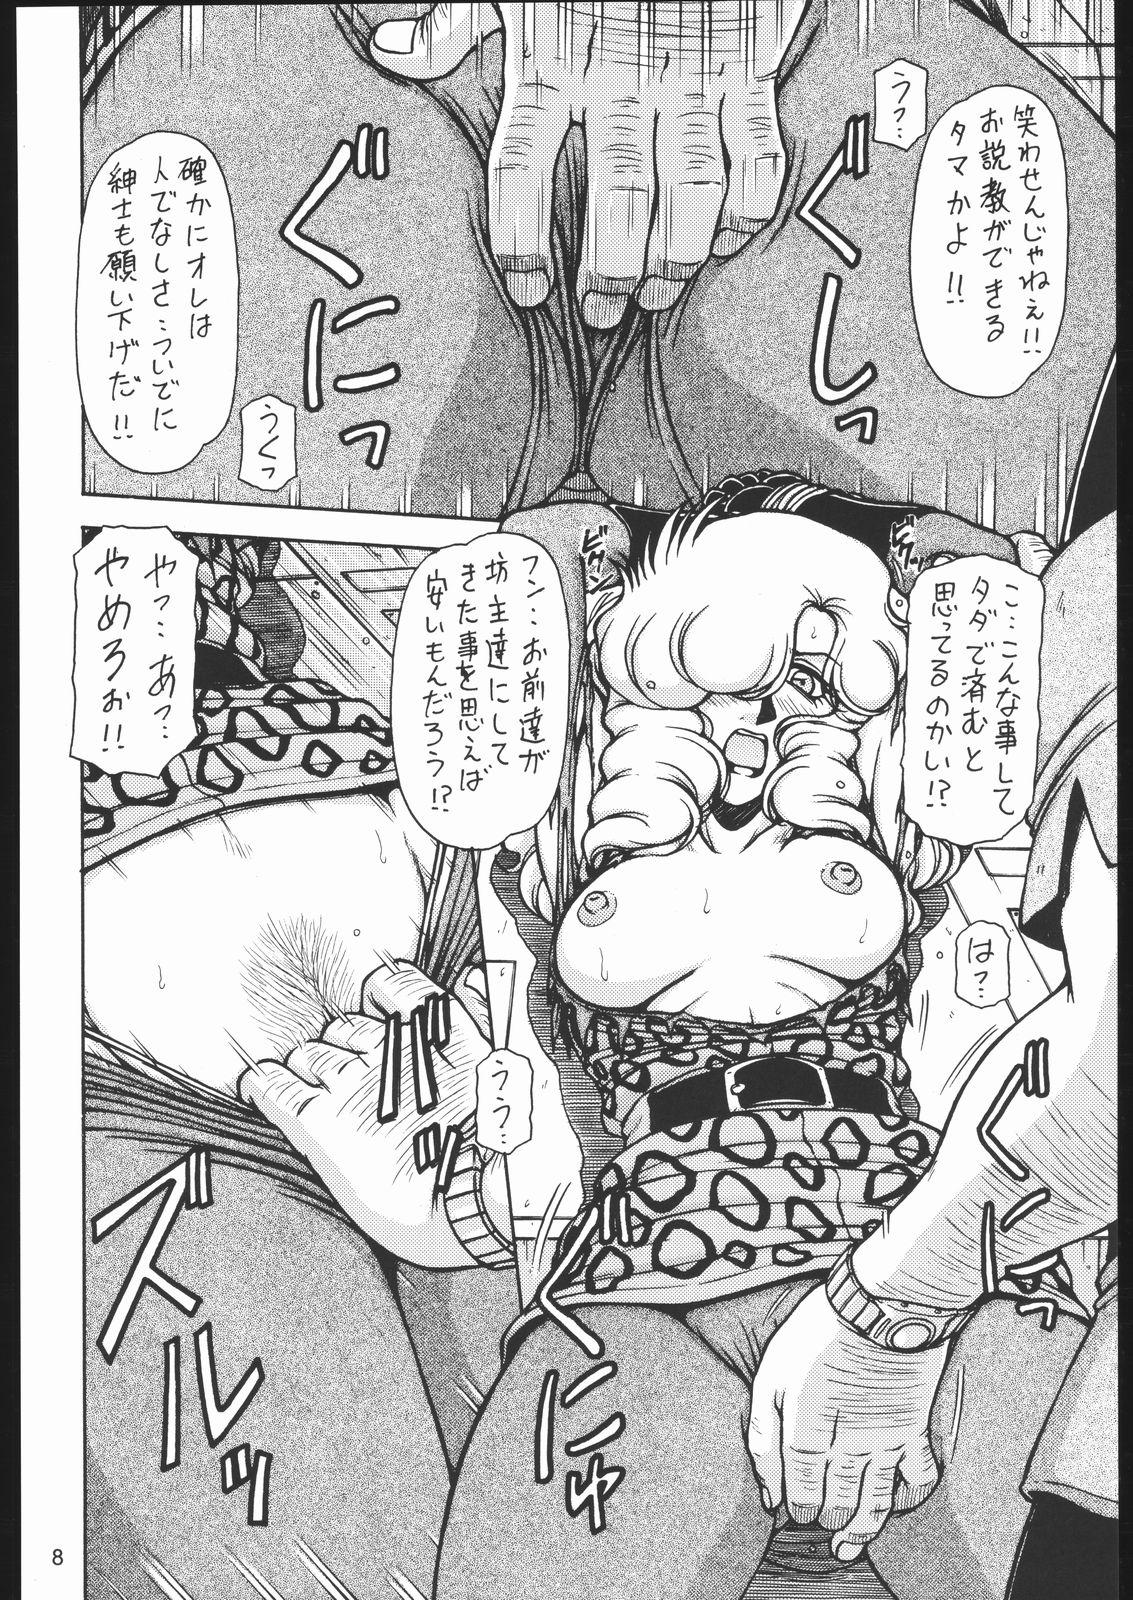 Wet Pussy Red Muffler GG - Giant gorg Butt Sex - Page 7